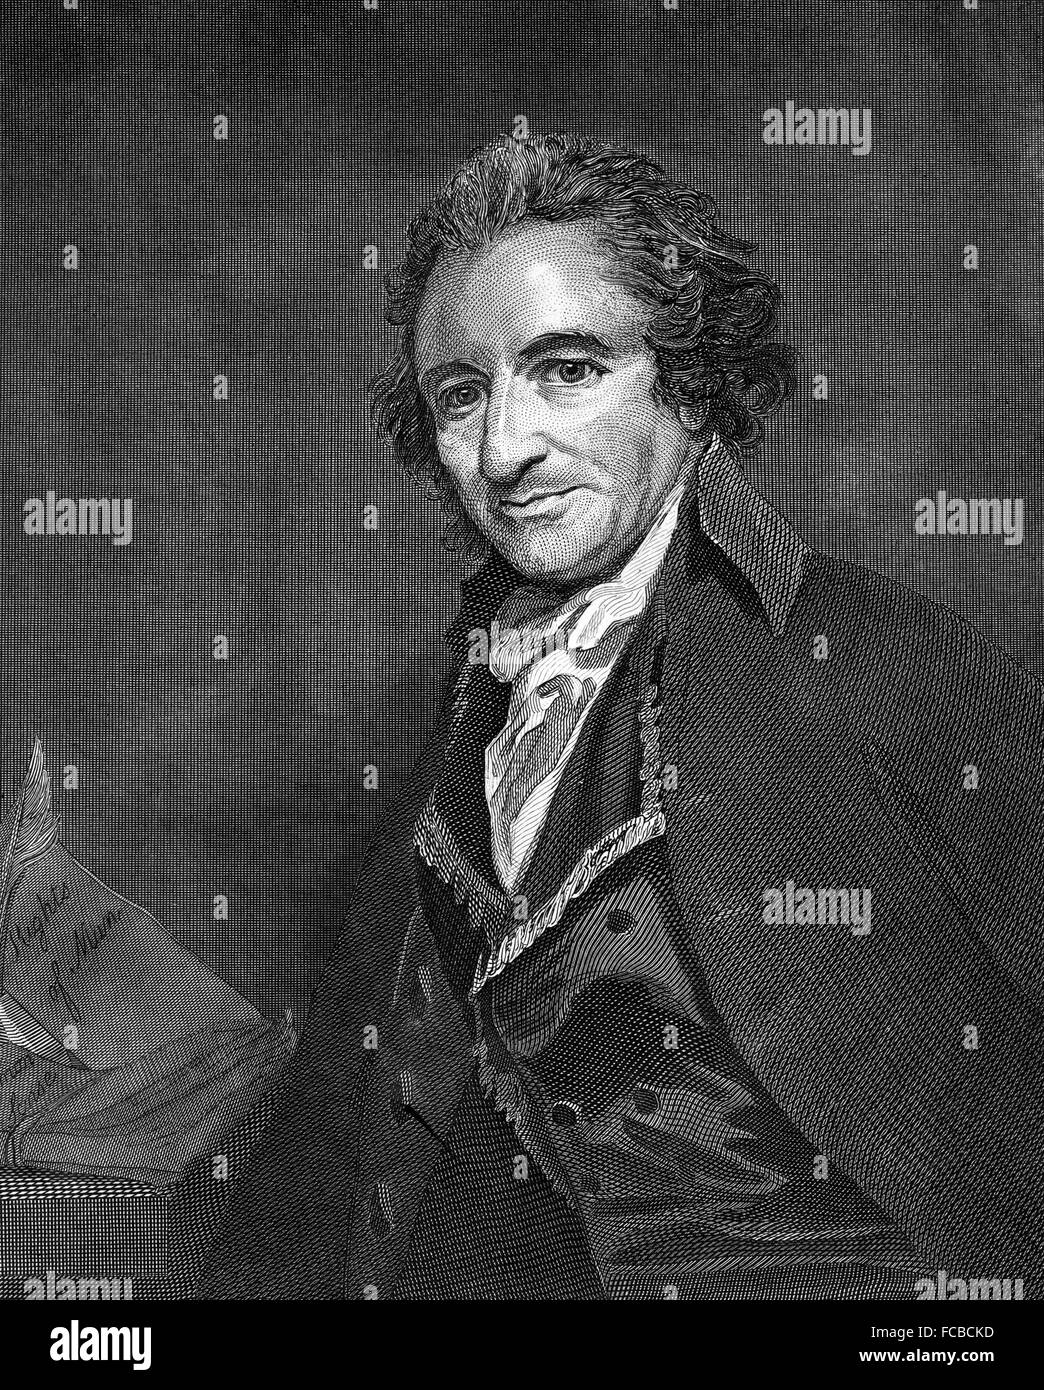 Thomas Paine, the English born activist and philosopher, whose pamphlet Common Sense (1776) crystallized the rebellious demand for independence from Great Britain. Engraving by William Sharp, c.1794. Stock Photo